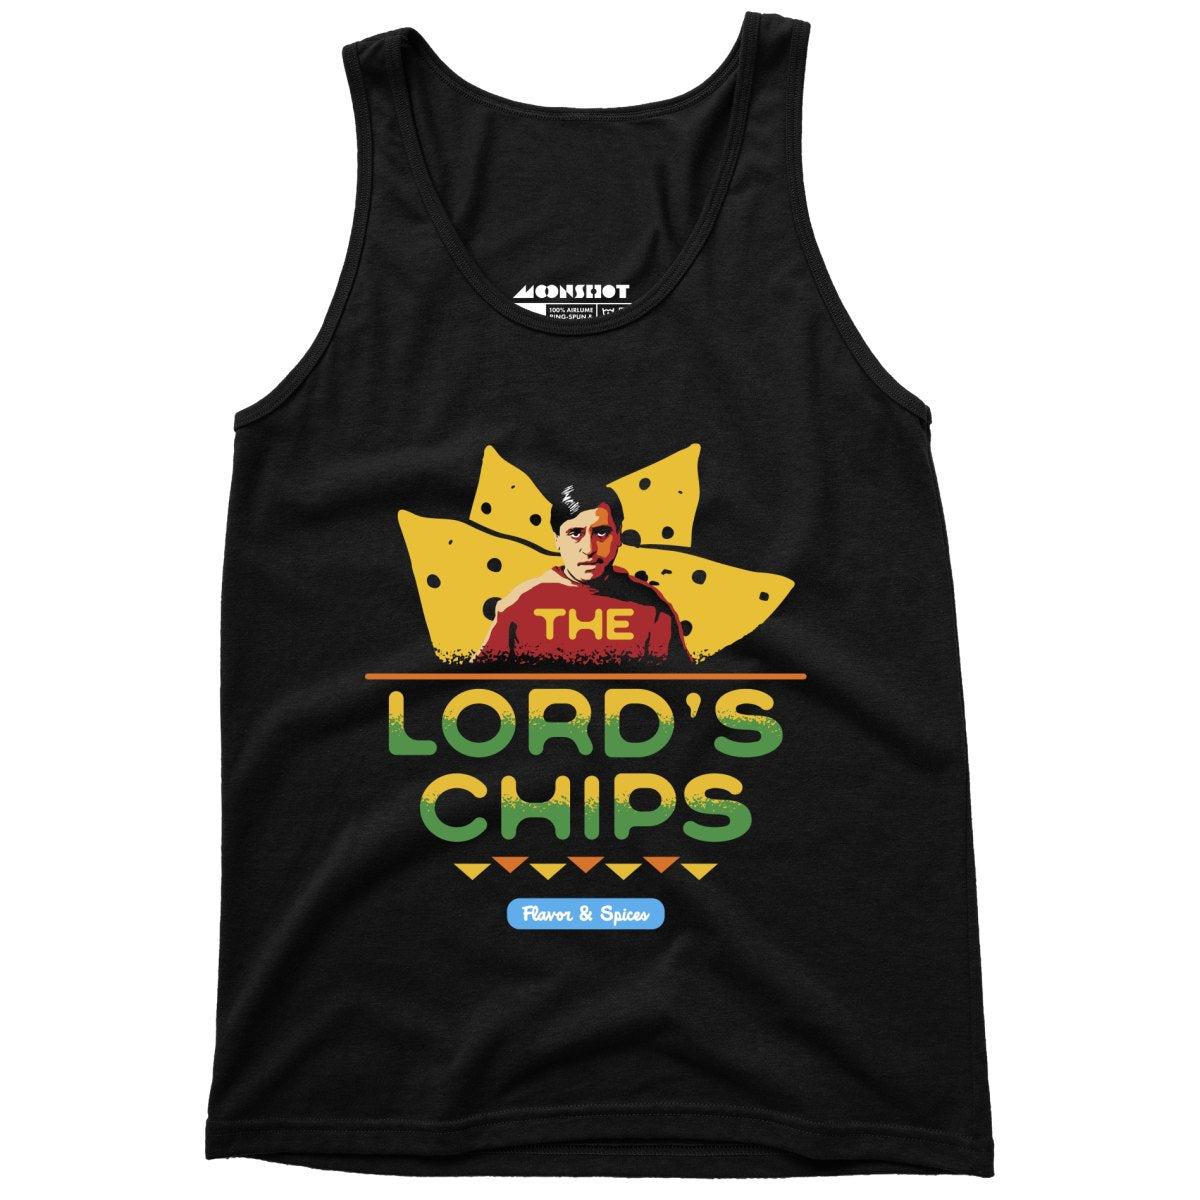 The Lord's Chips - Unisex Tank Top